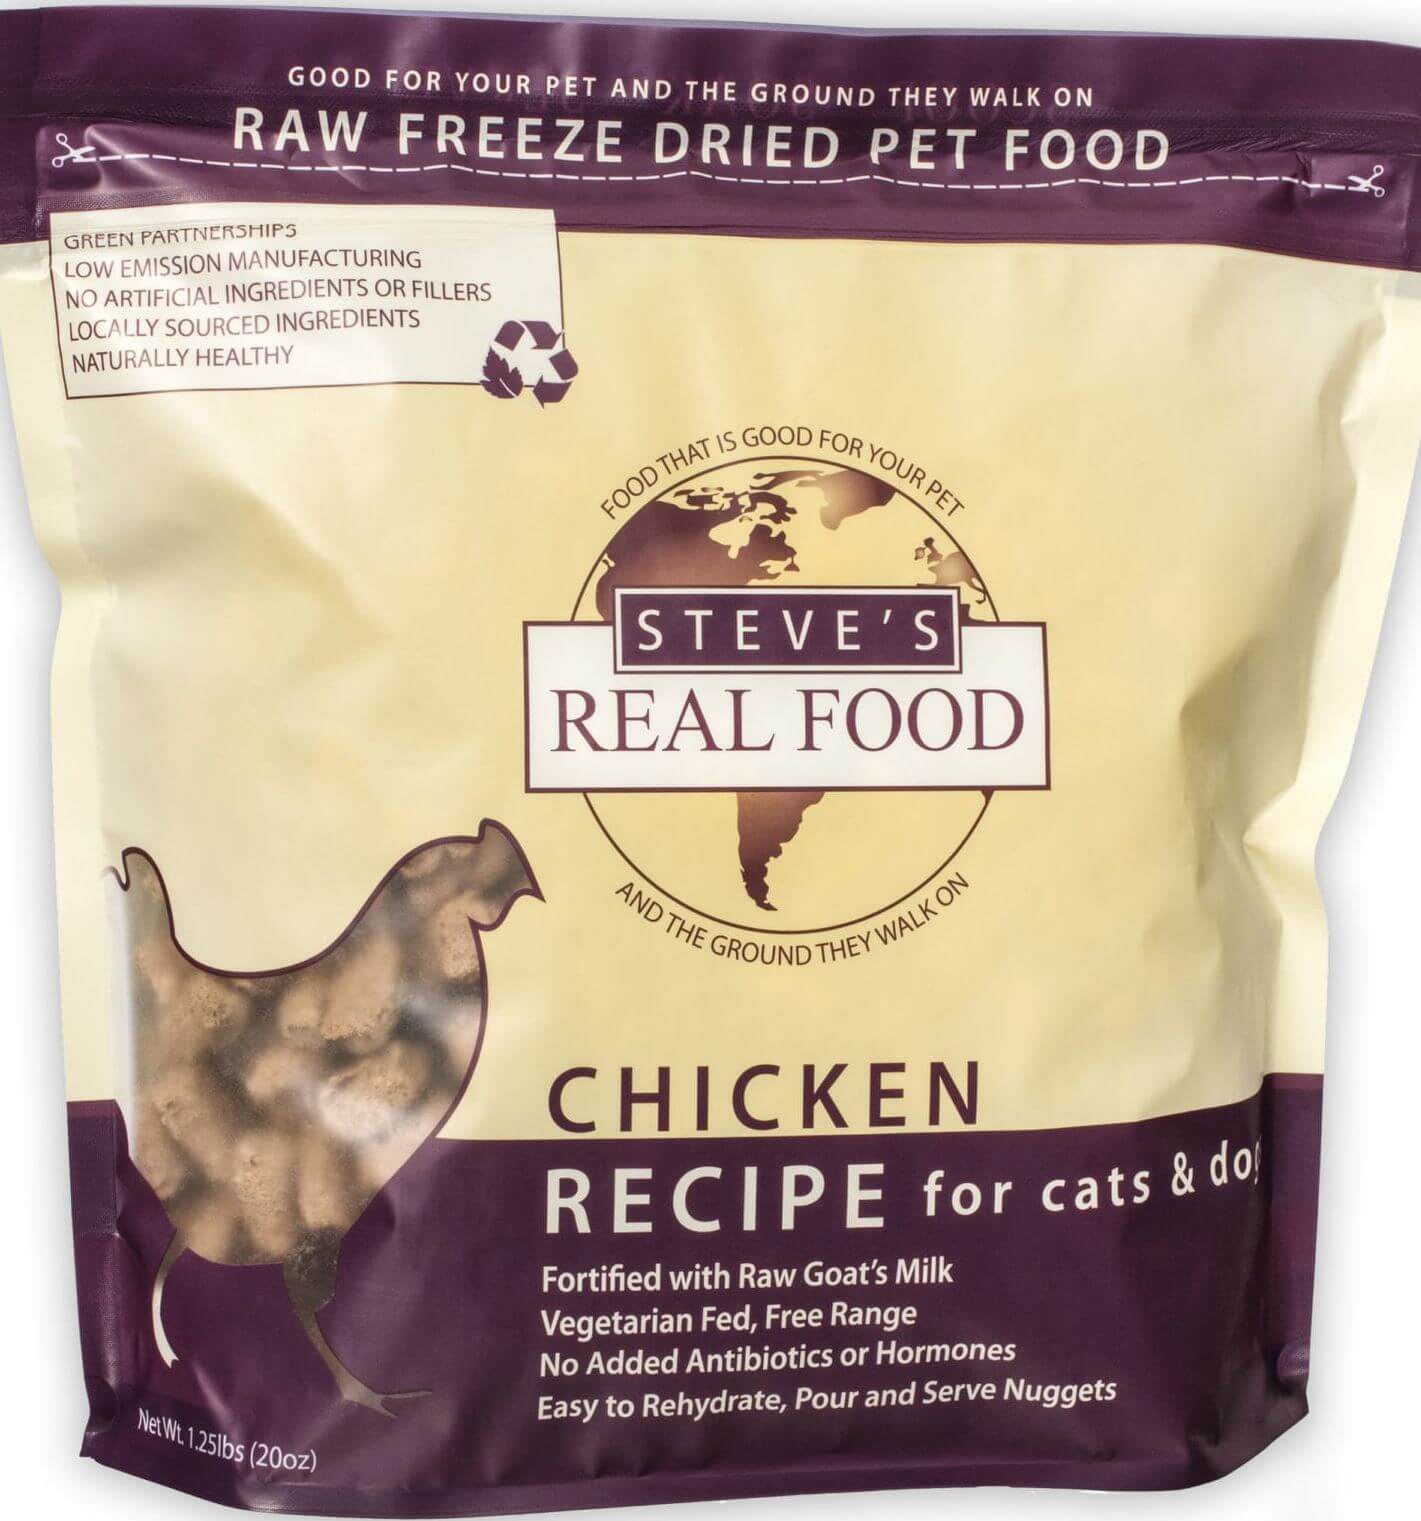 Steve’s Real Food Dog Food Review (Freeze-Dried)